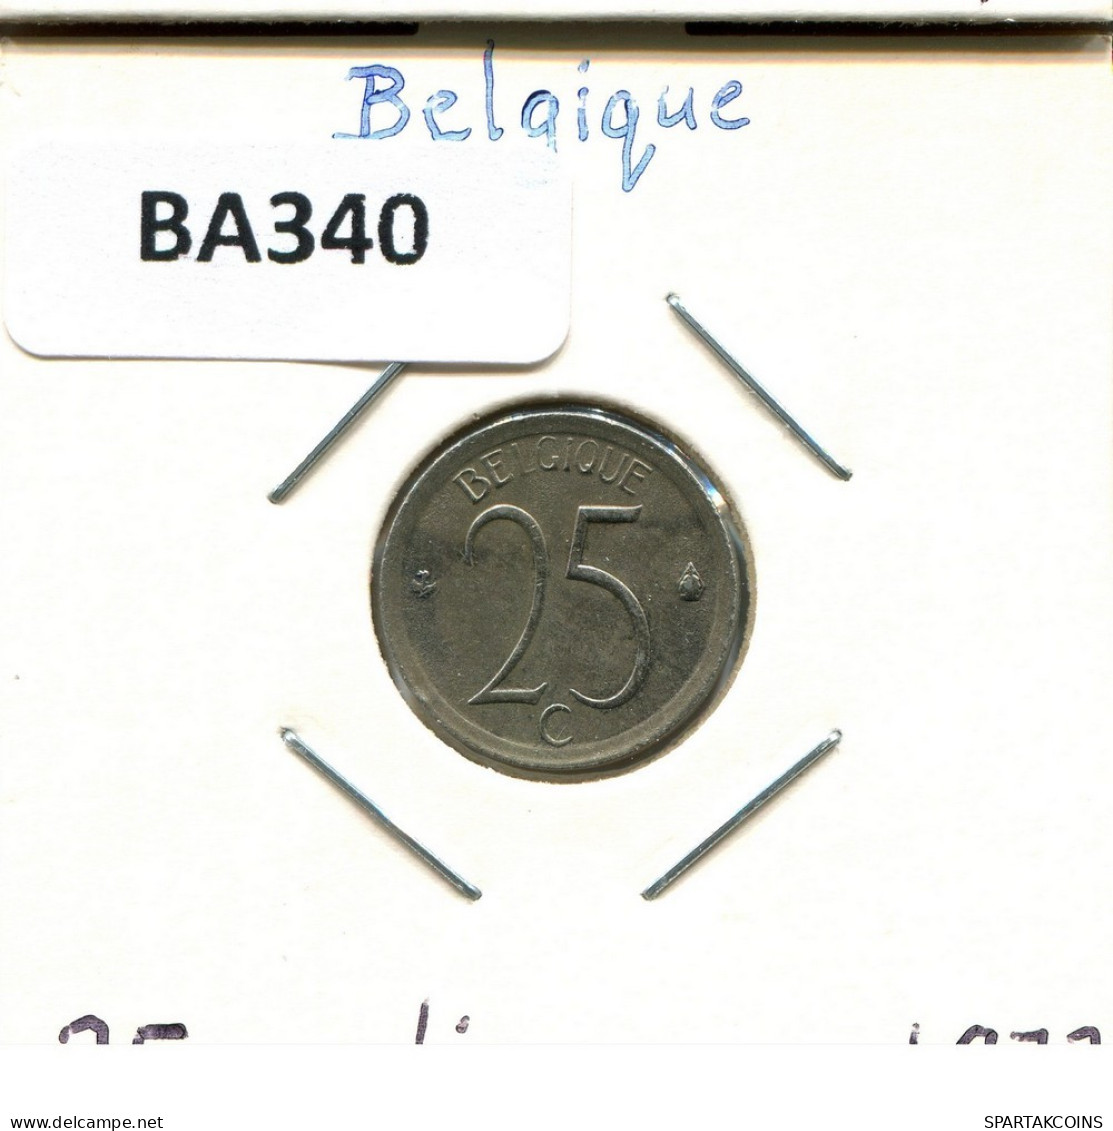 25 CENTIMES 1973 FRENCH Text BELGIUM Coin #BA340.U.A - 25 Cent